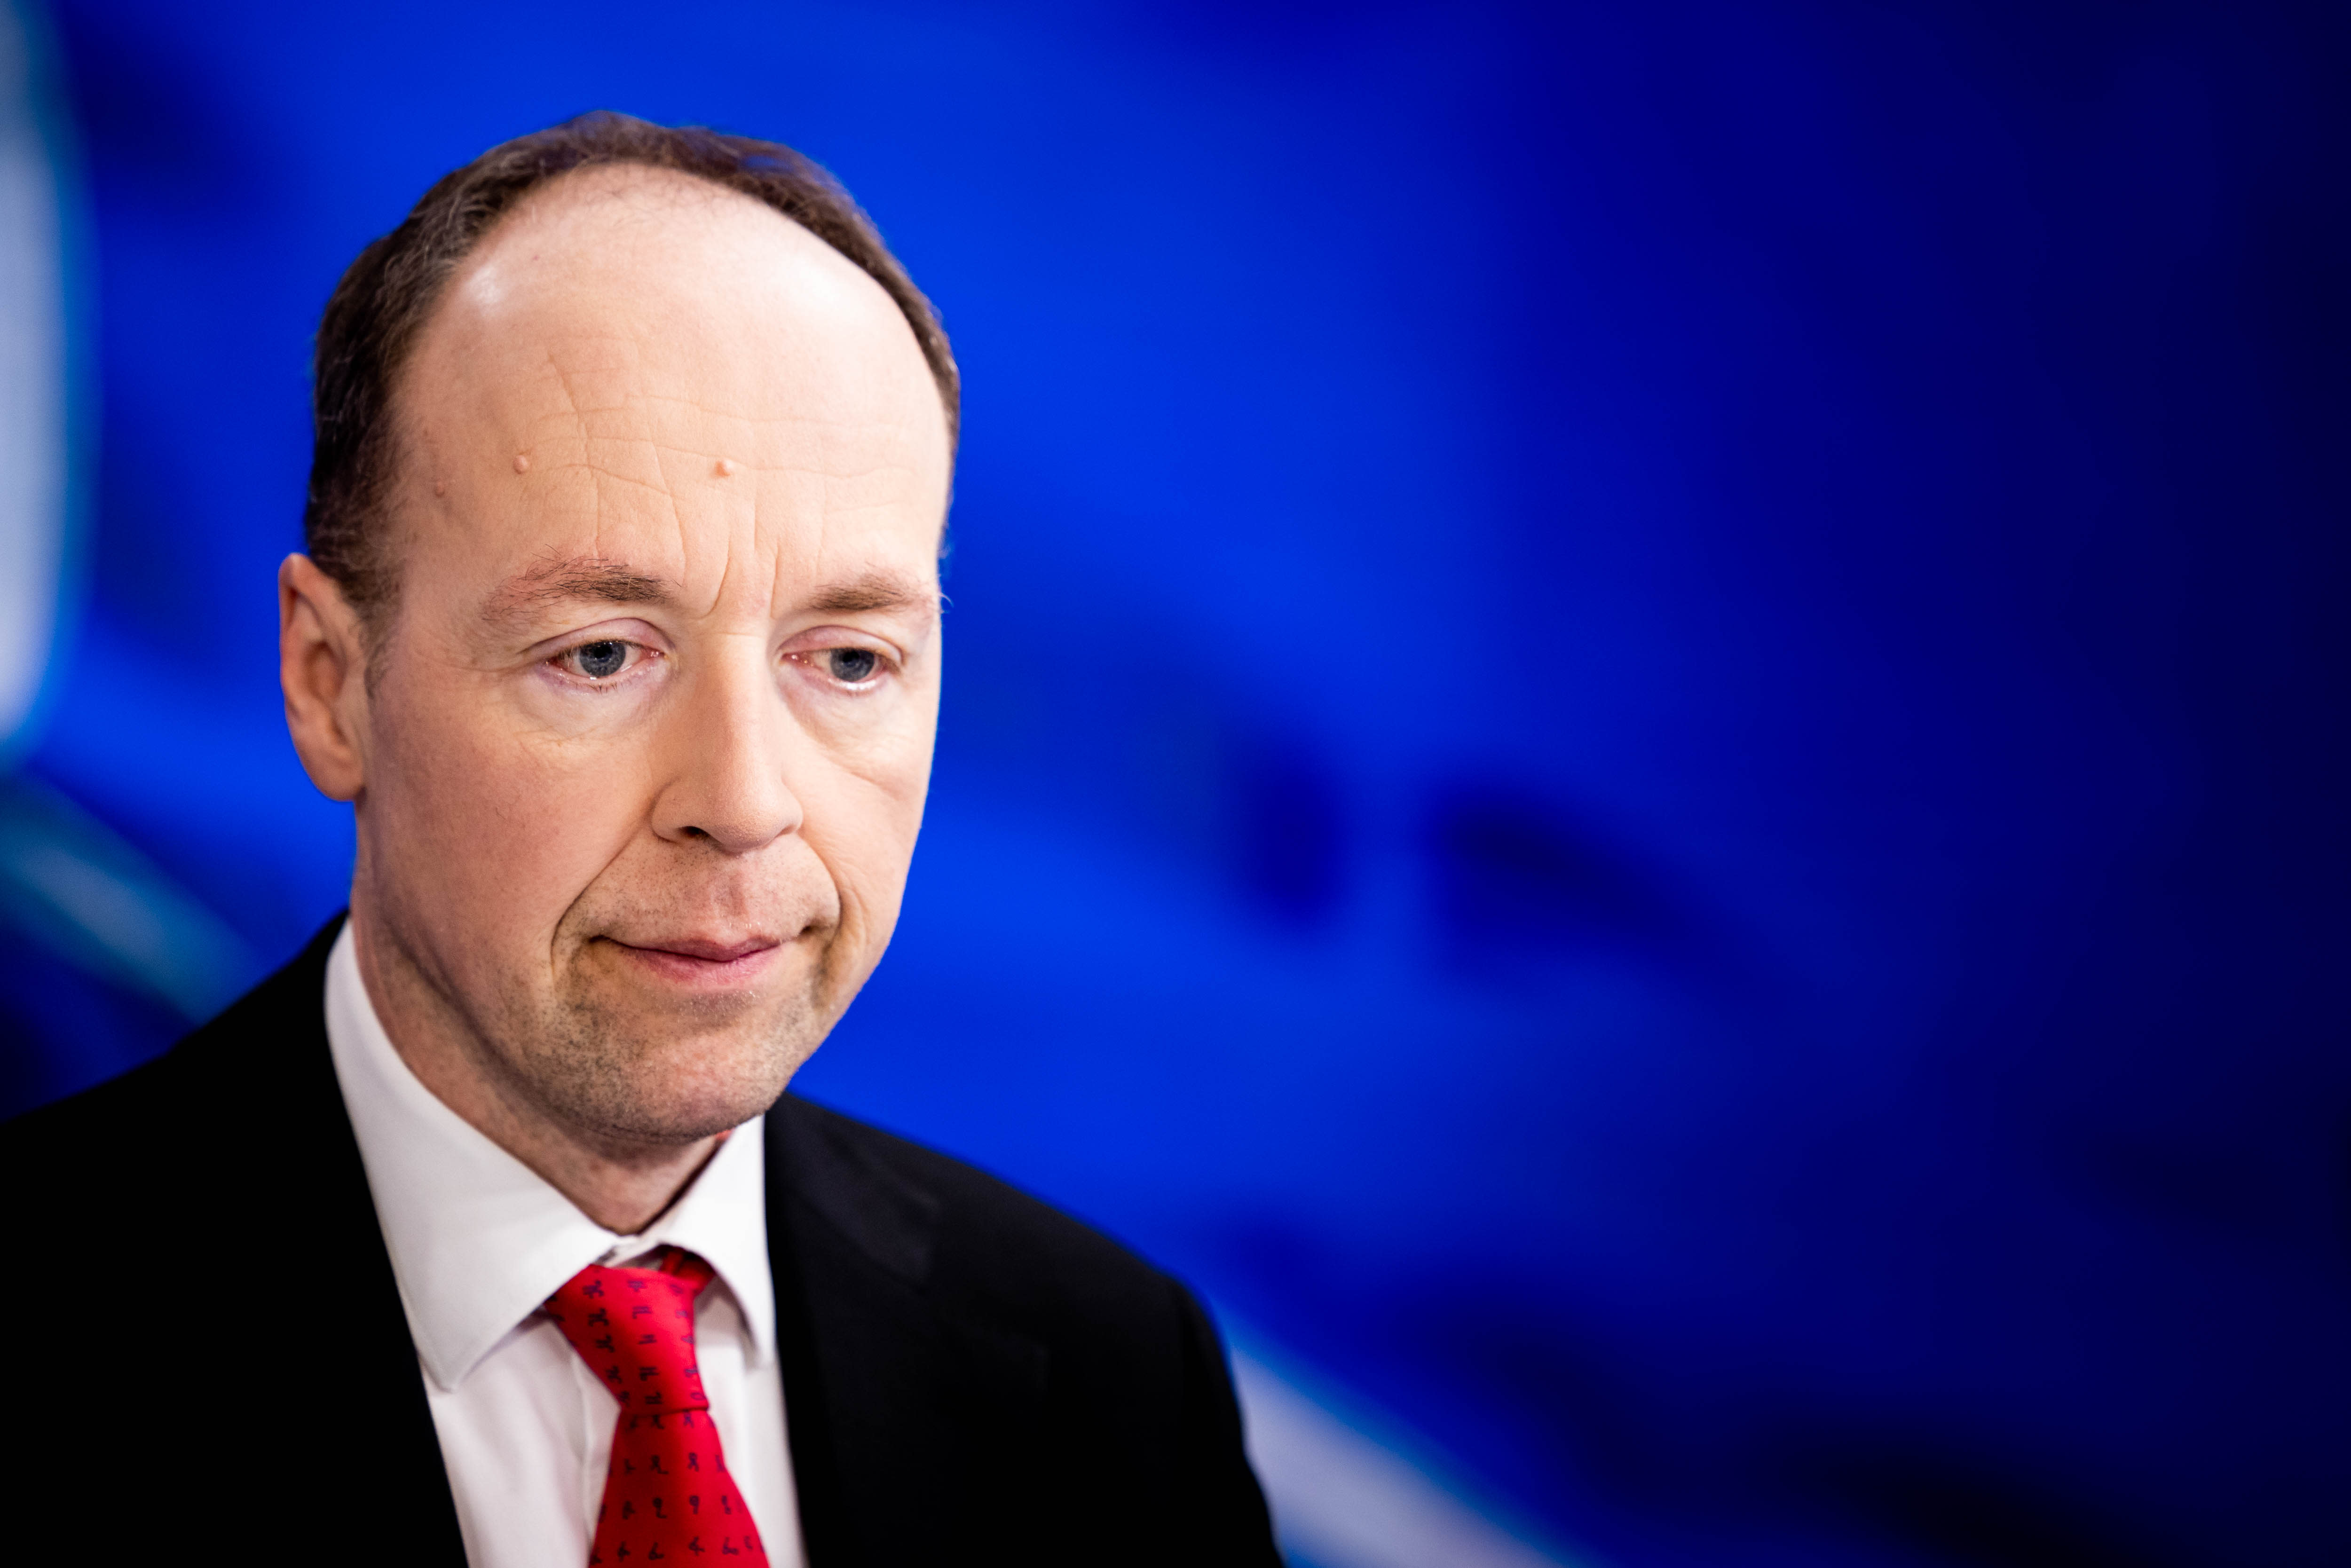 Halla-aho: "The progress of Finland’s and Sweden’s NATO membership processes is more important than simultaneity"